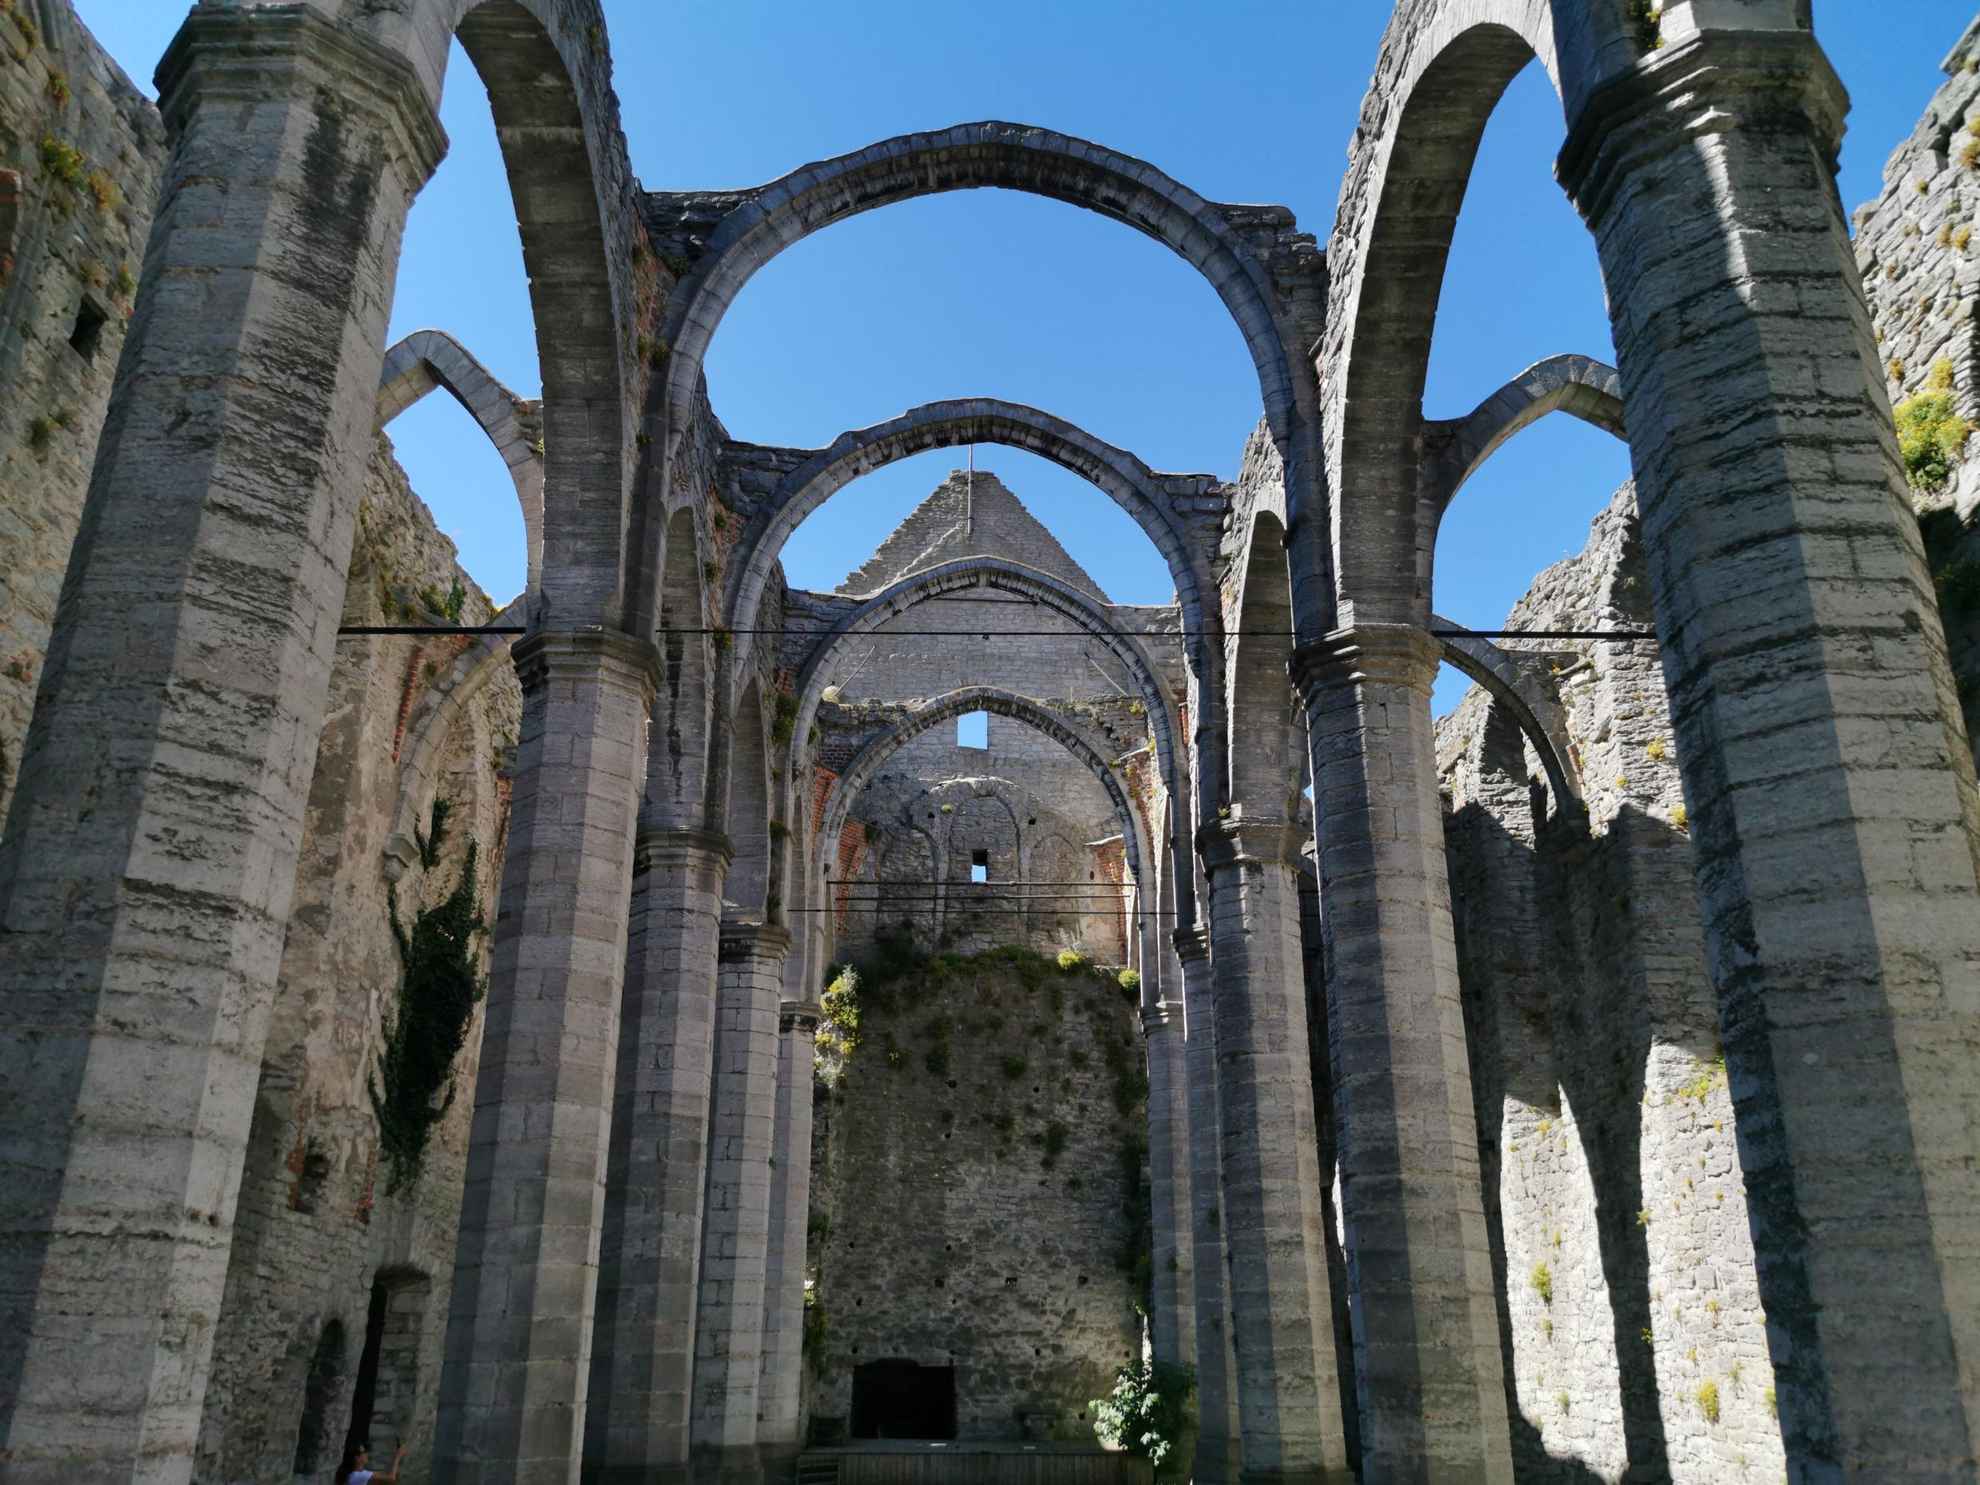 Inside a church ruin with high vaults without a ceiling.